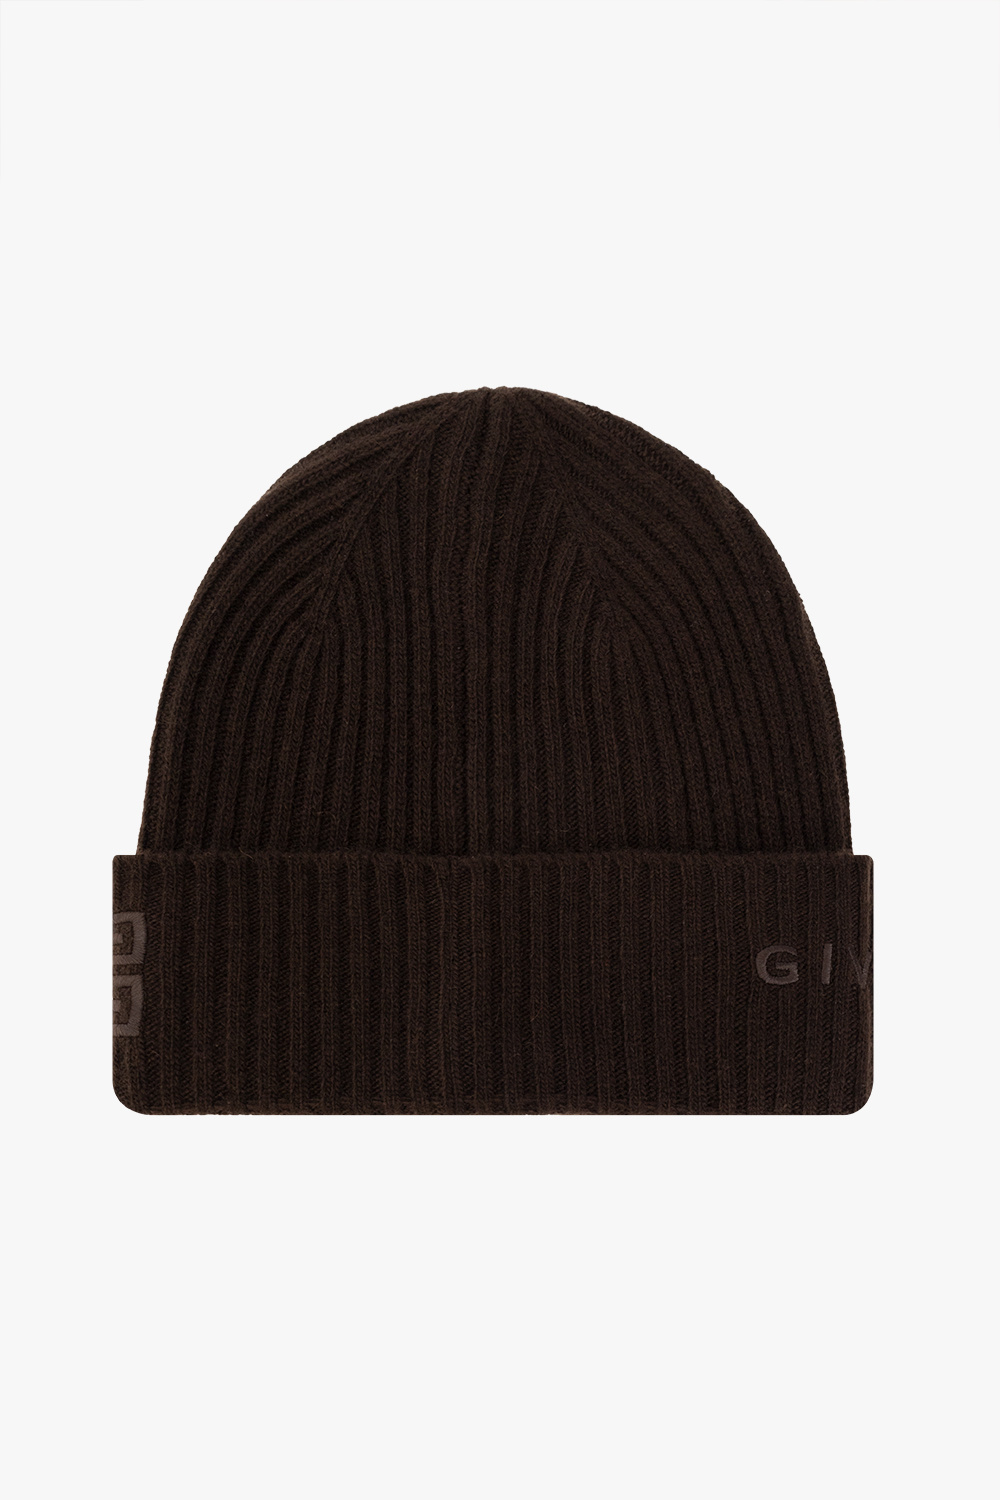 Givenchy Beanie with celebrity